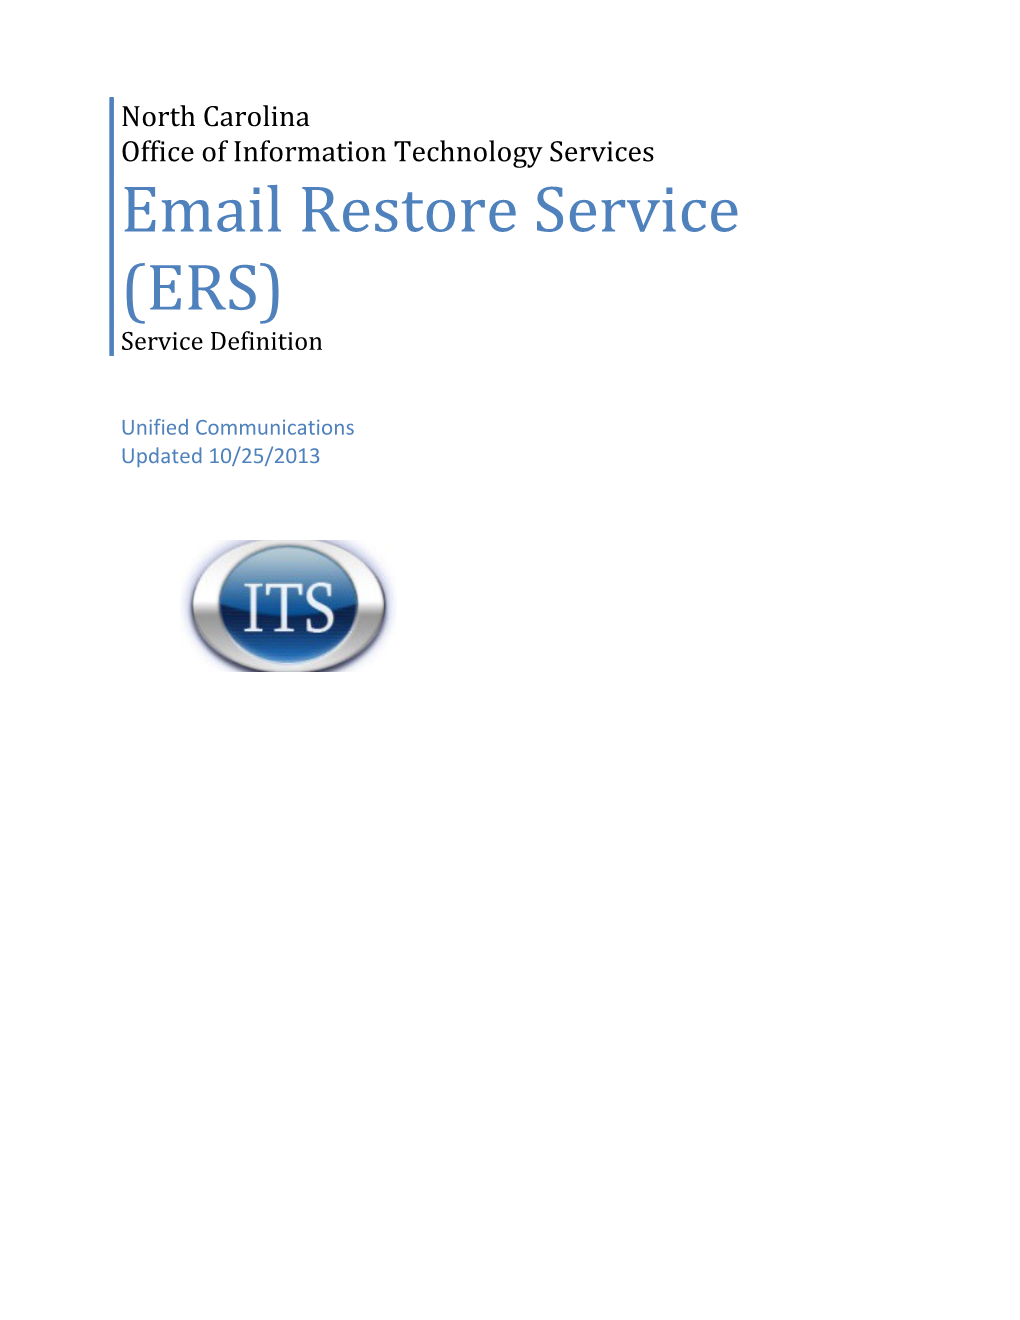 Email Restore Service (ERS)